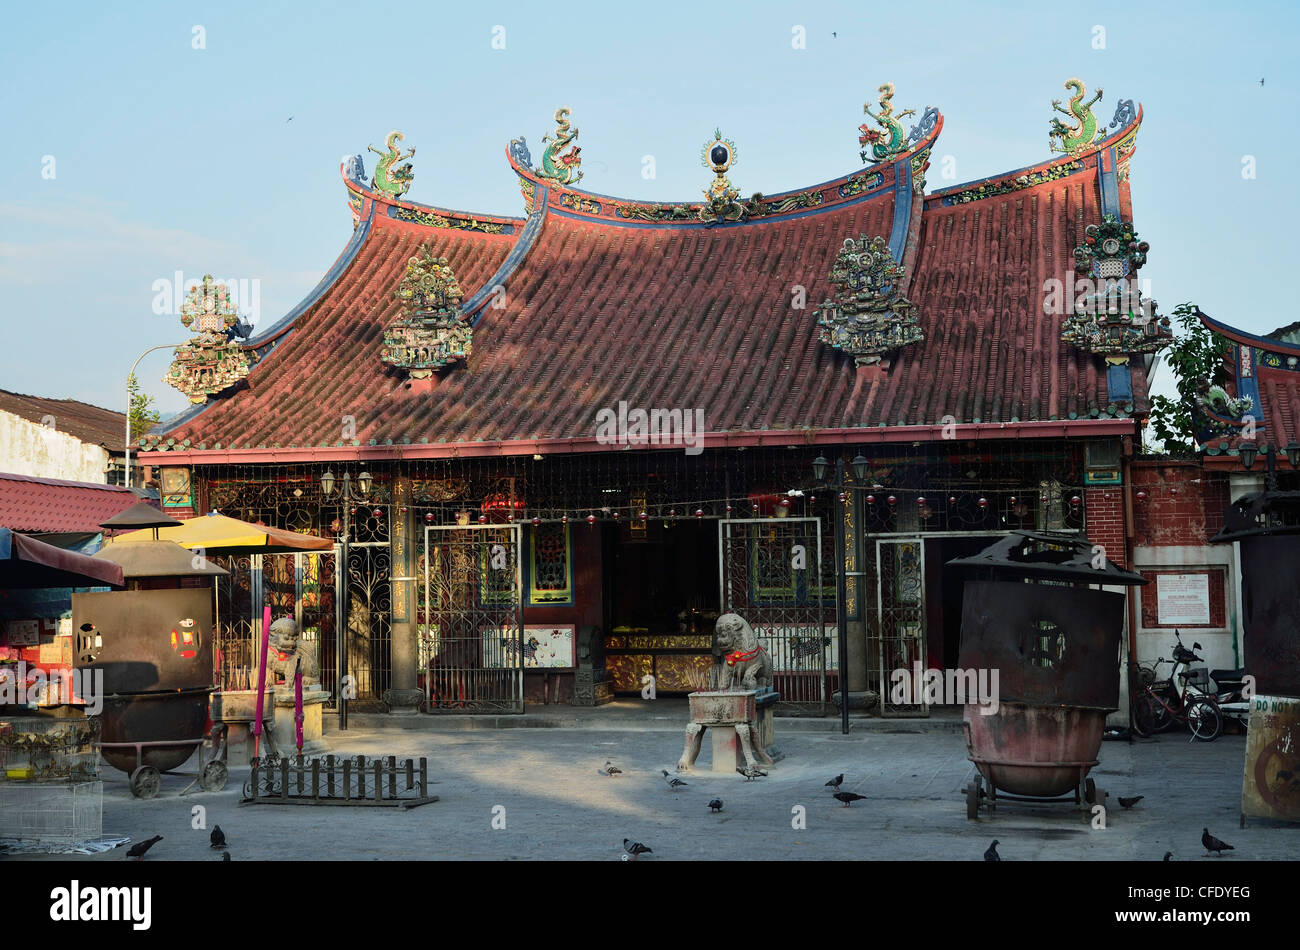 Goddess of Mercy Temple, George Town, UNESCO World Heritage Site, Penang, Malaisie, Asie du Sud, Asie Banque D'Images